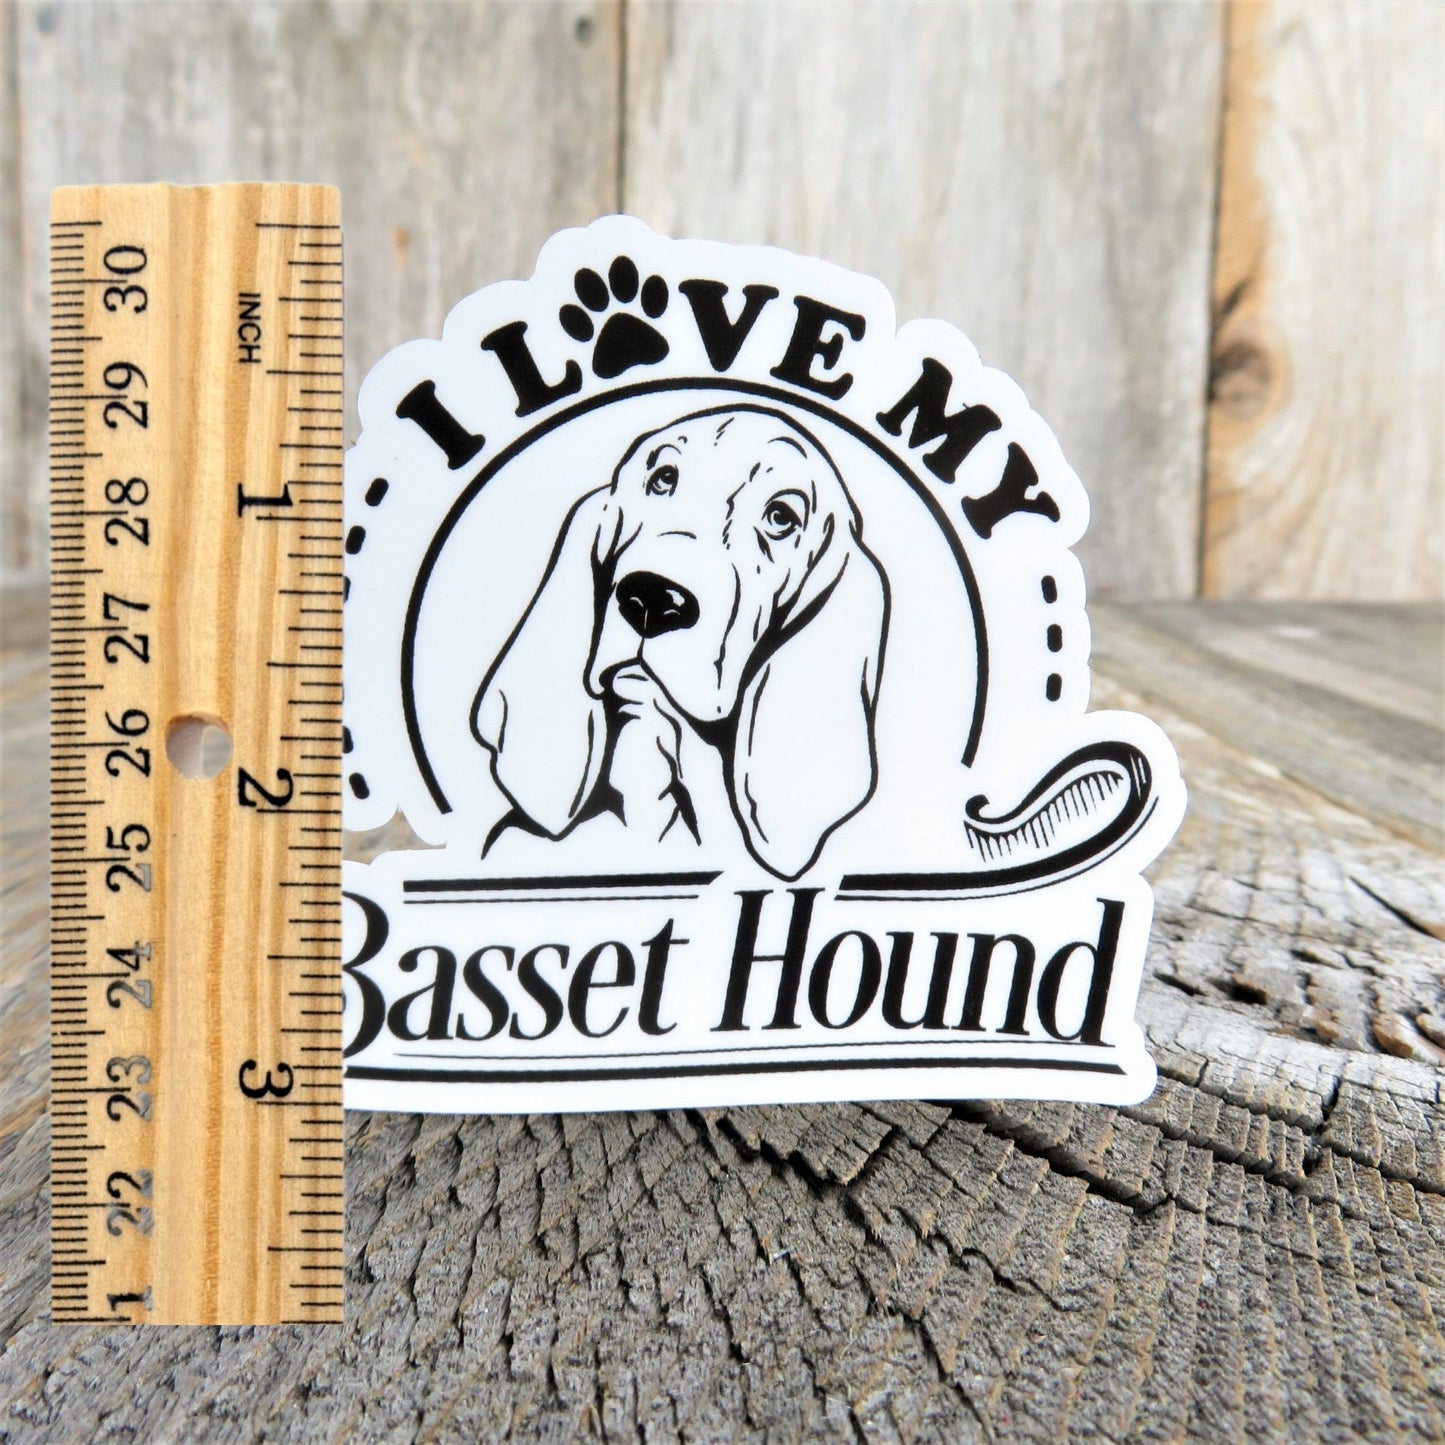 I Love My Basset Hound Dog Sticker Decal Black and White Waterproof Dog Lover Gift for Car Water Bottle Laptop